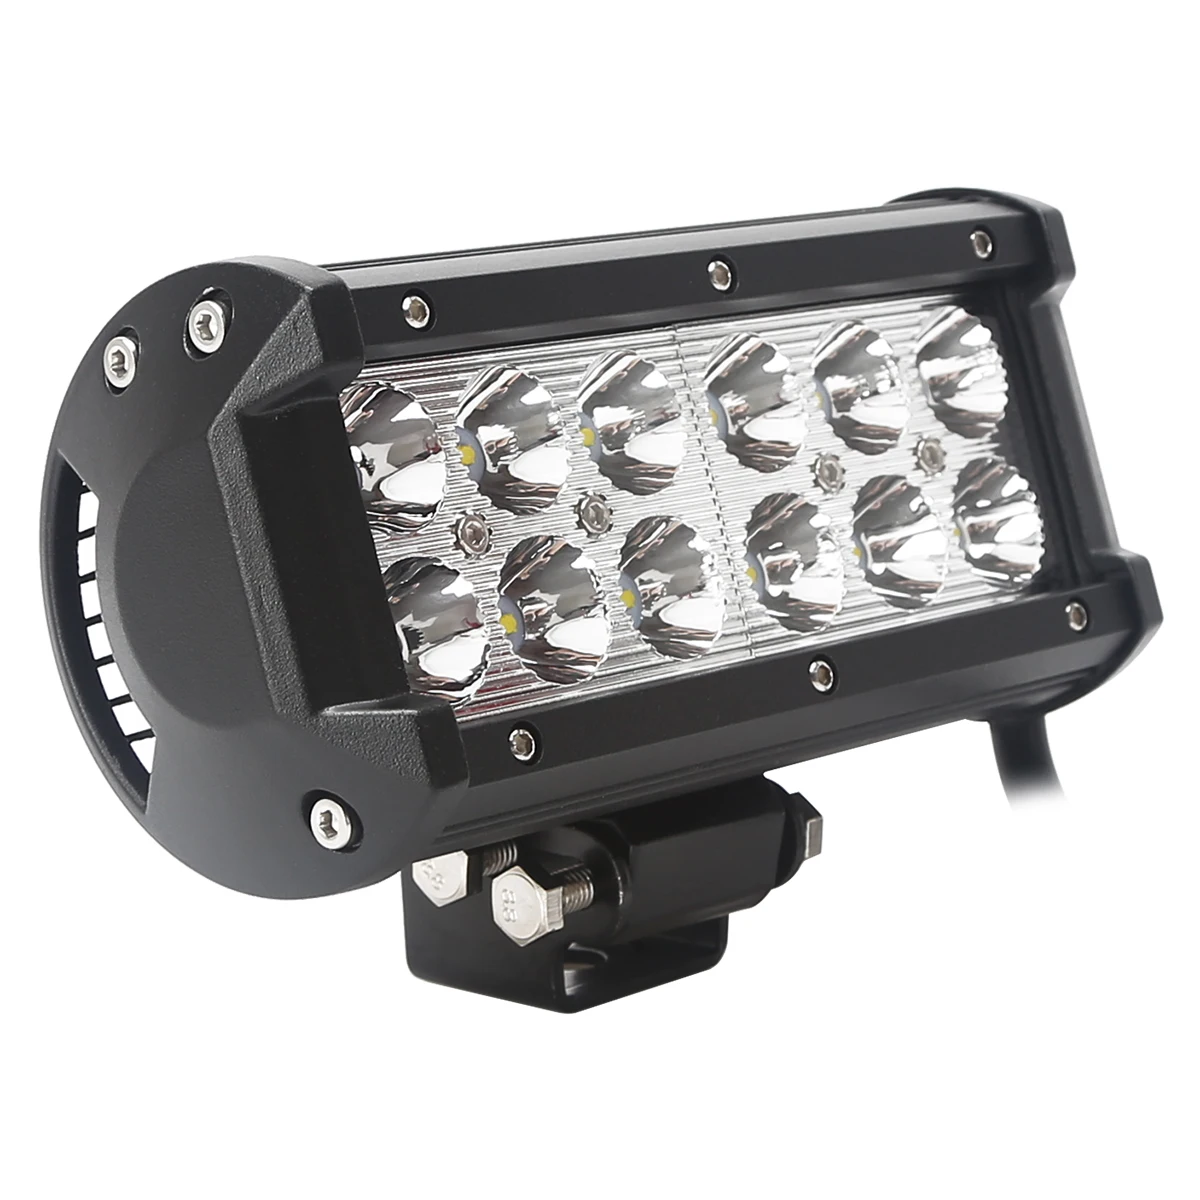 Hot Sale 6.5 Inch 36W 12V Offroad Jeeps Cube LED Combo Light Bar Spot Flood Beam Driving Work Lamp